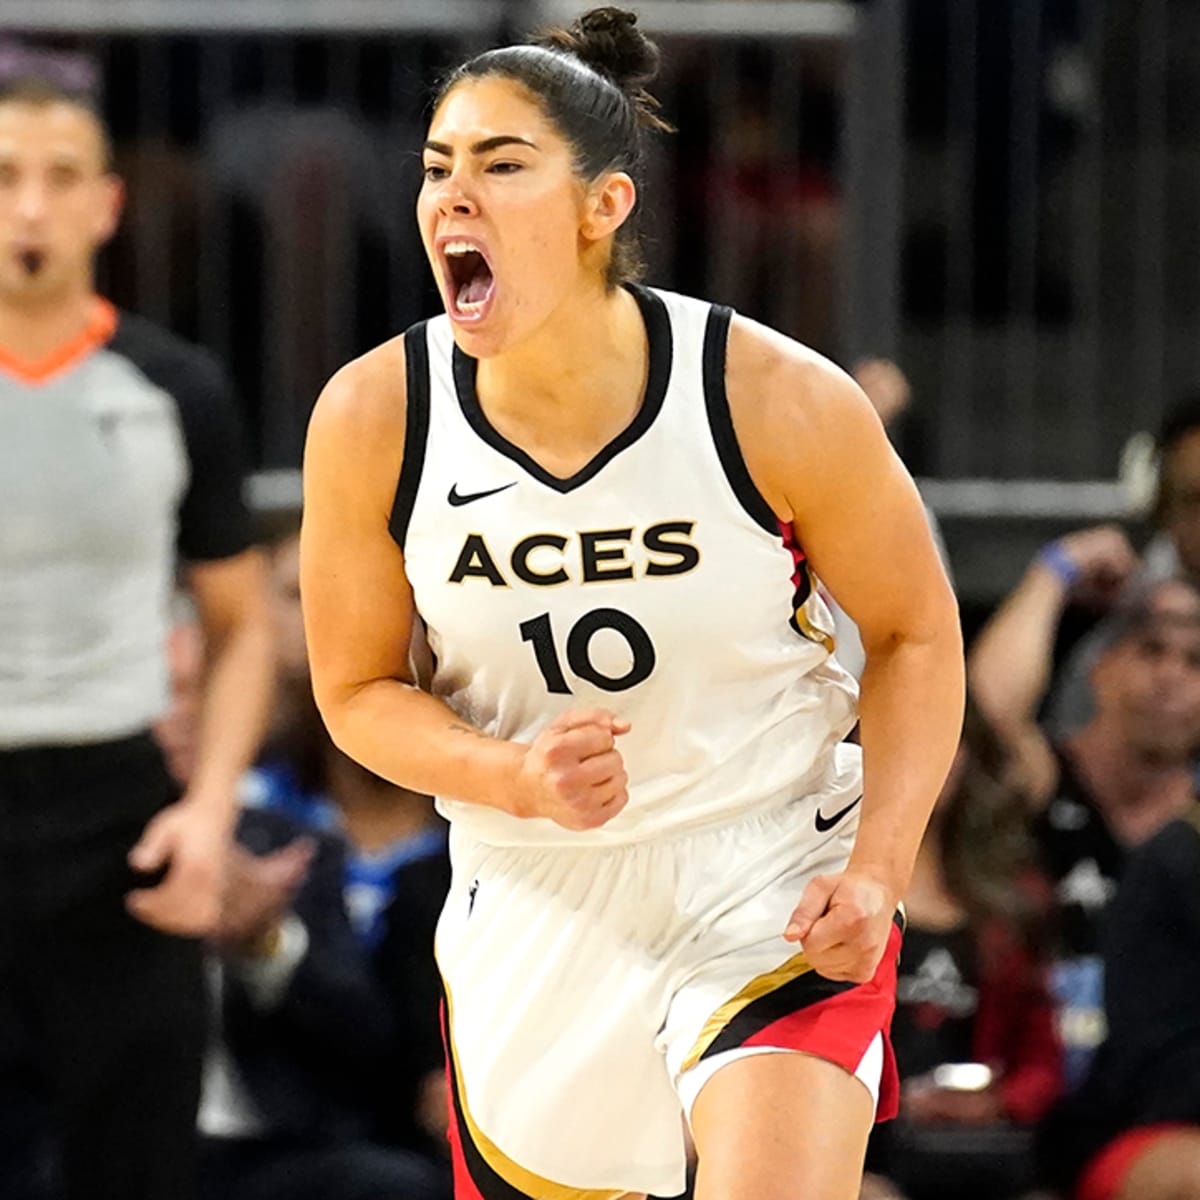 Kelsey Plum's 40-point-night one for Aces' record book